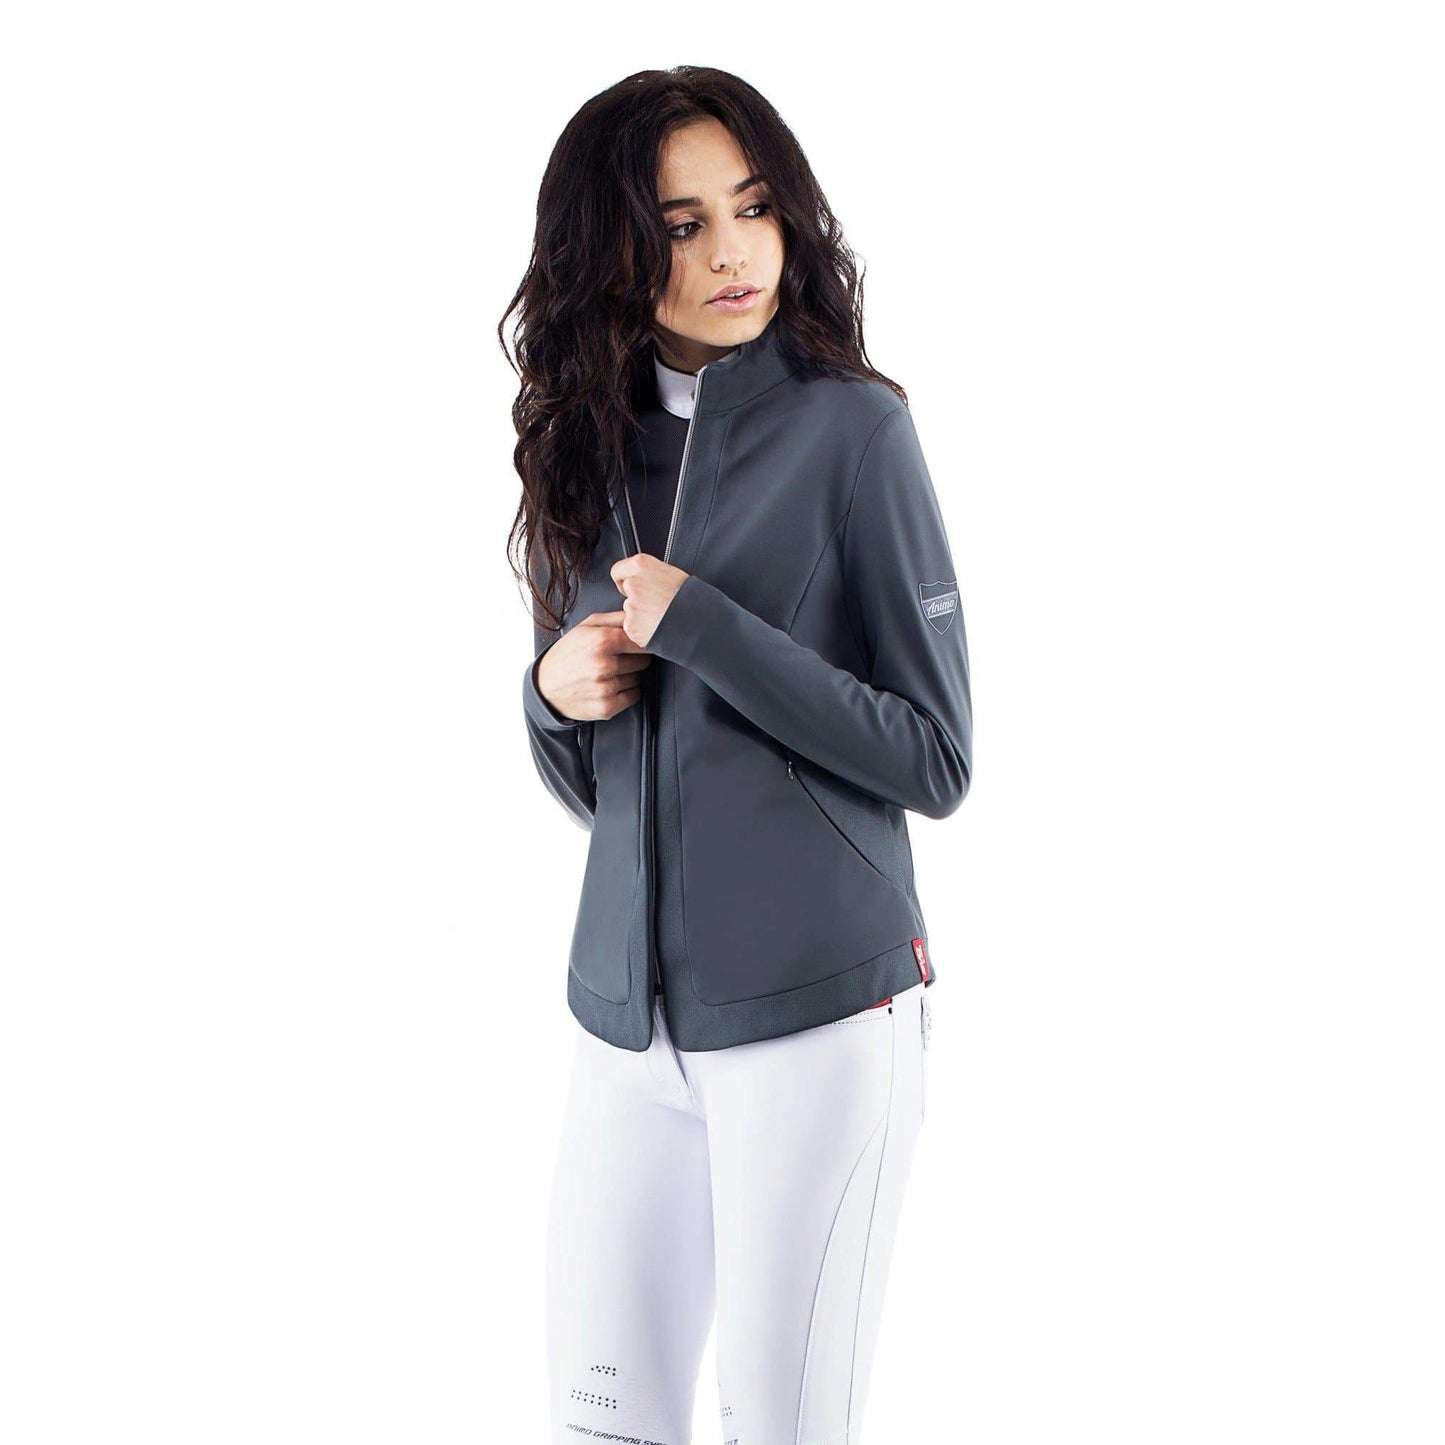 Woman in Animo brand jacket and white pants, looking away.